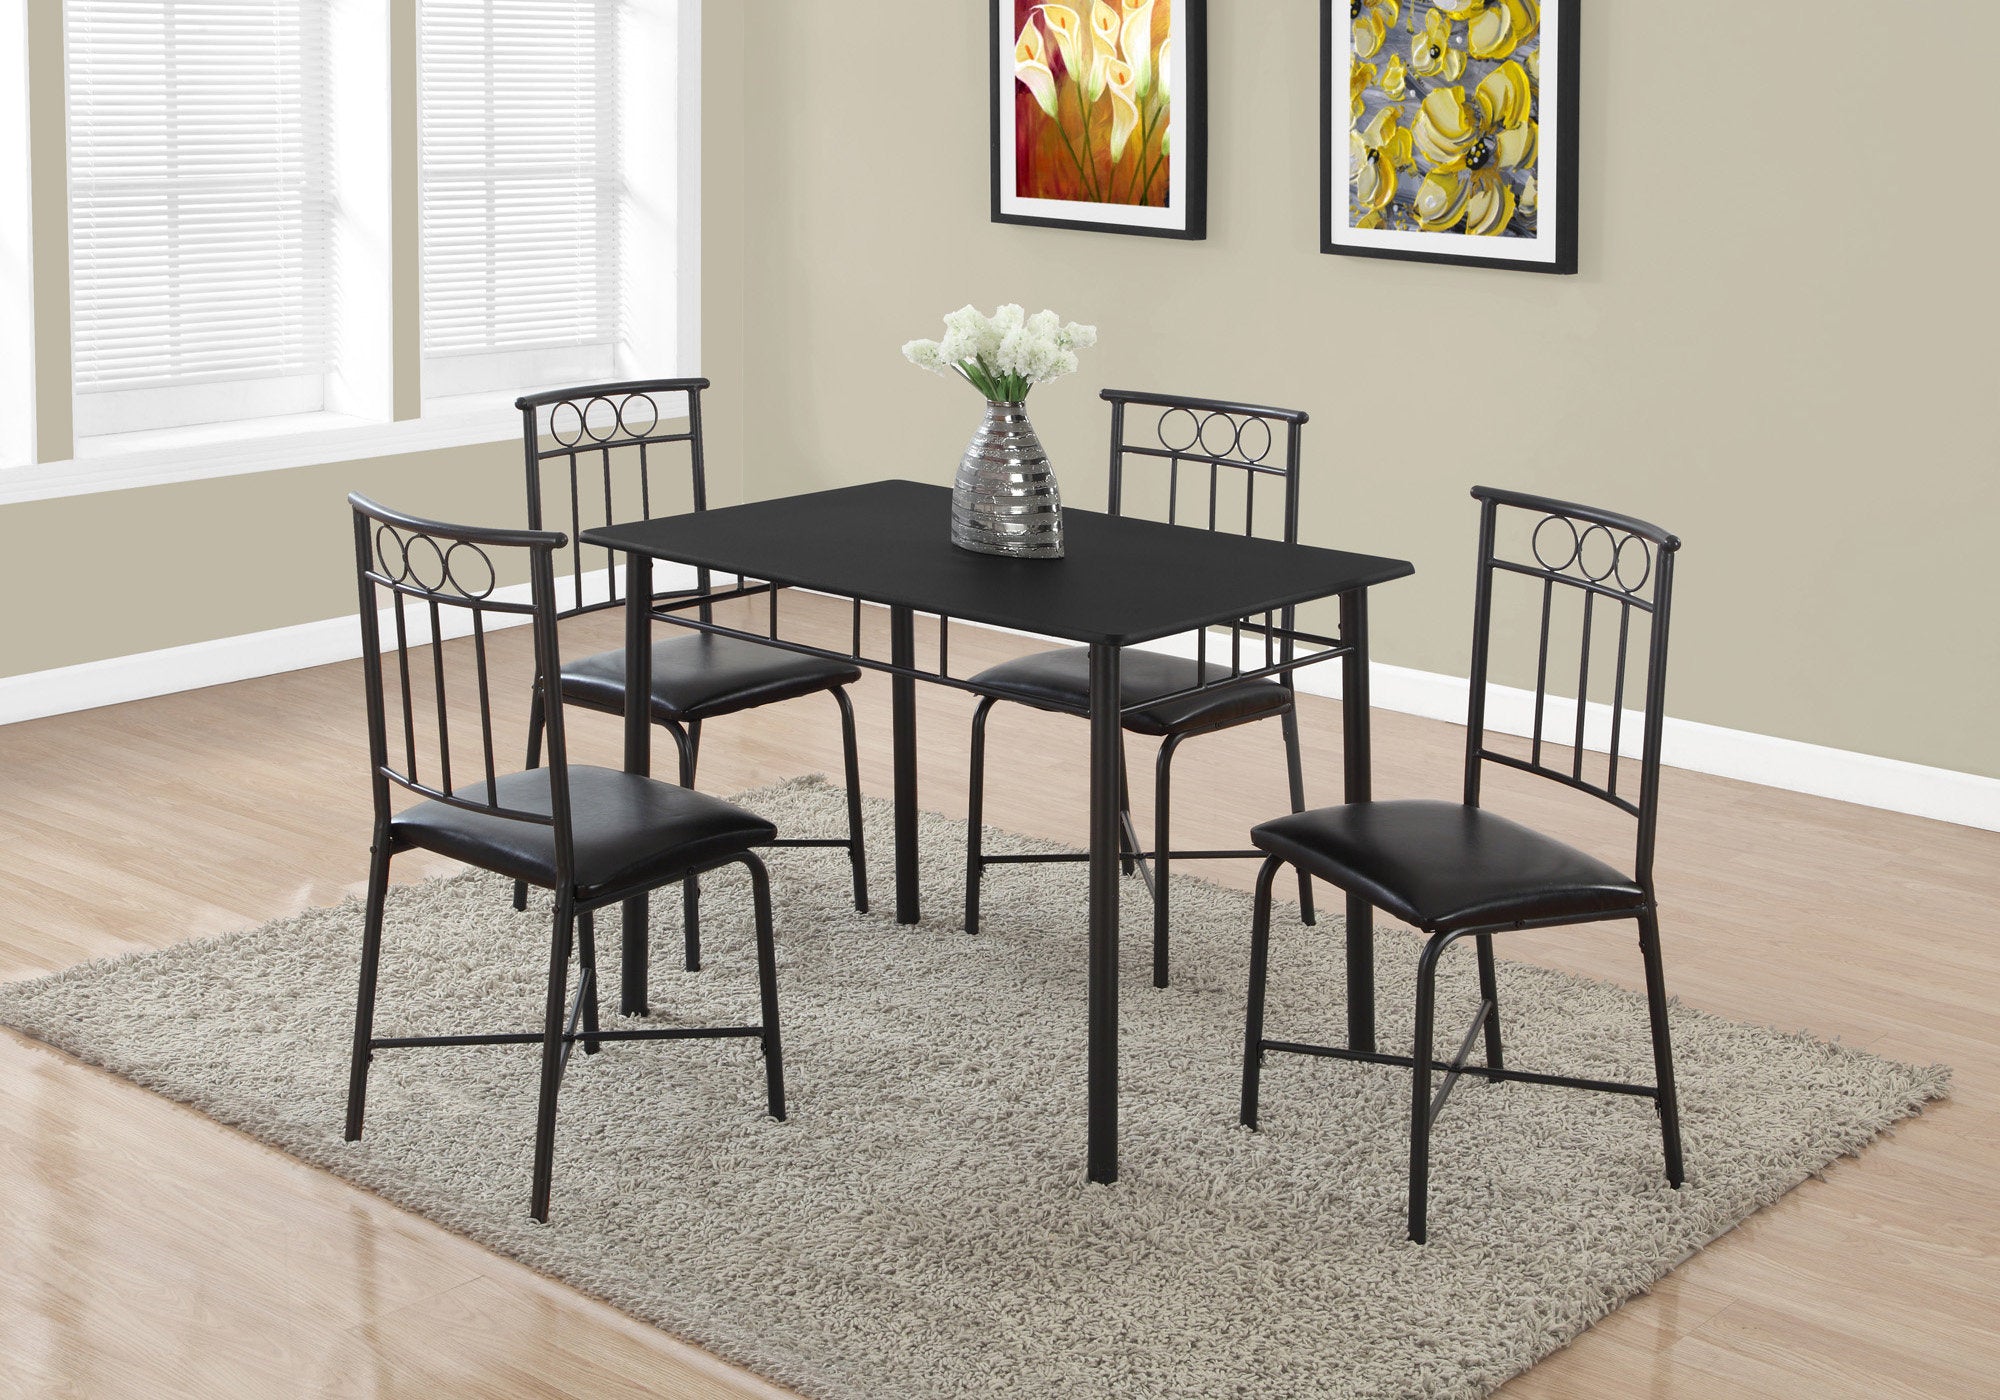 Modern Home Sturdy Rectangular Dining Table With 4 Metal Chair Set (Black)